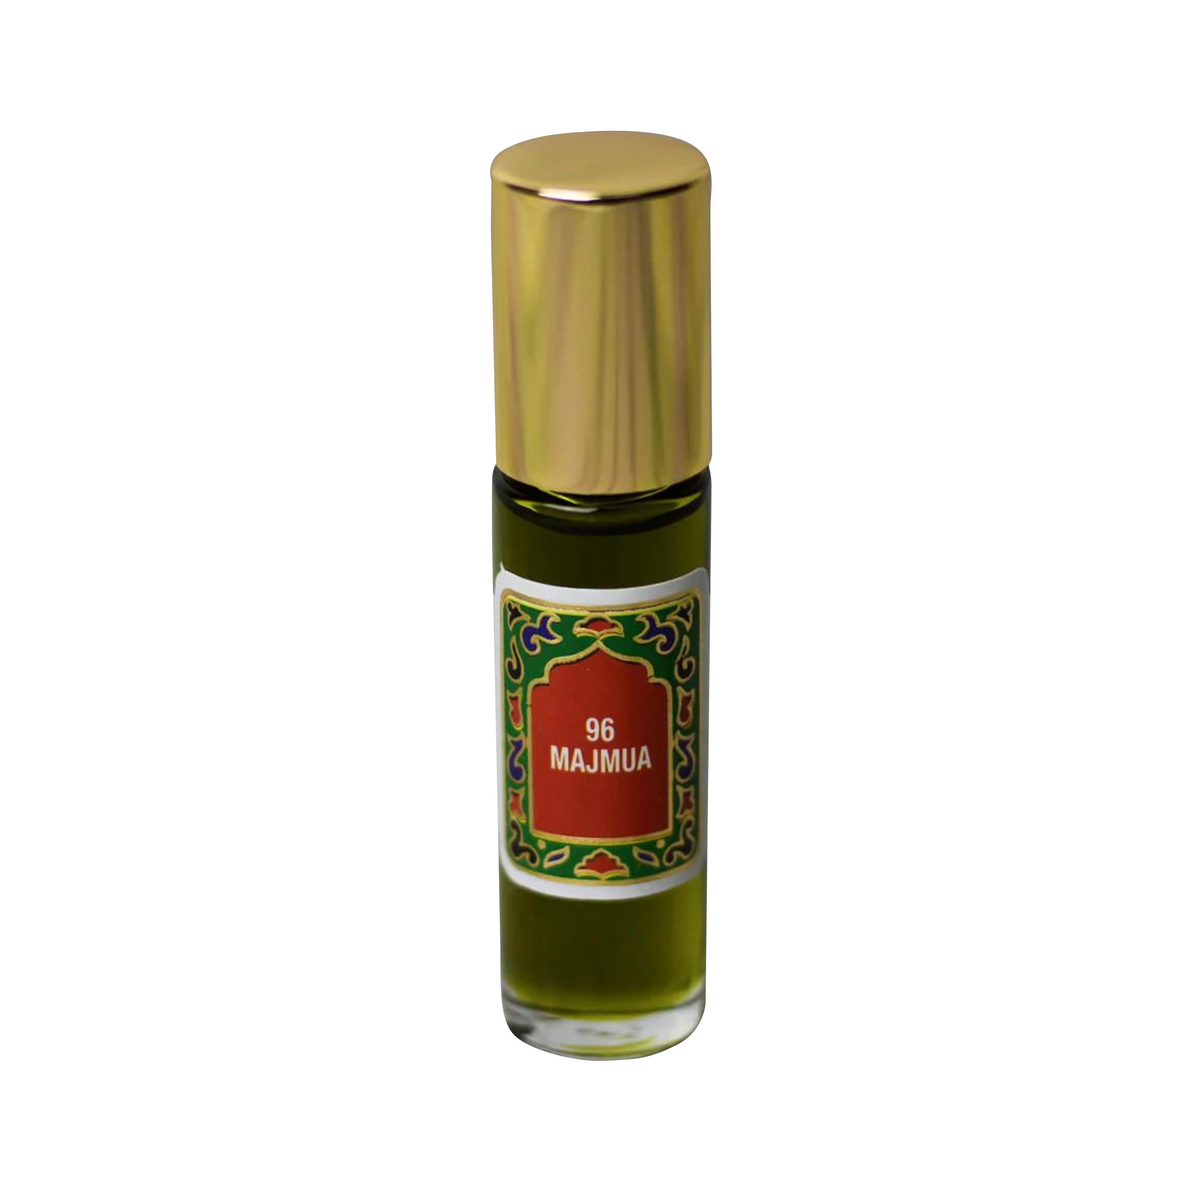 Primary image of Majmua Fragrance Roll-On